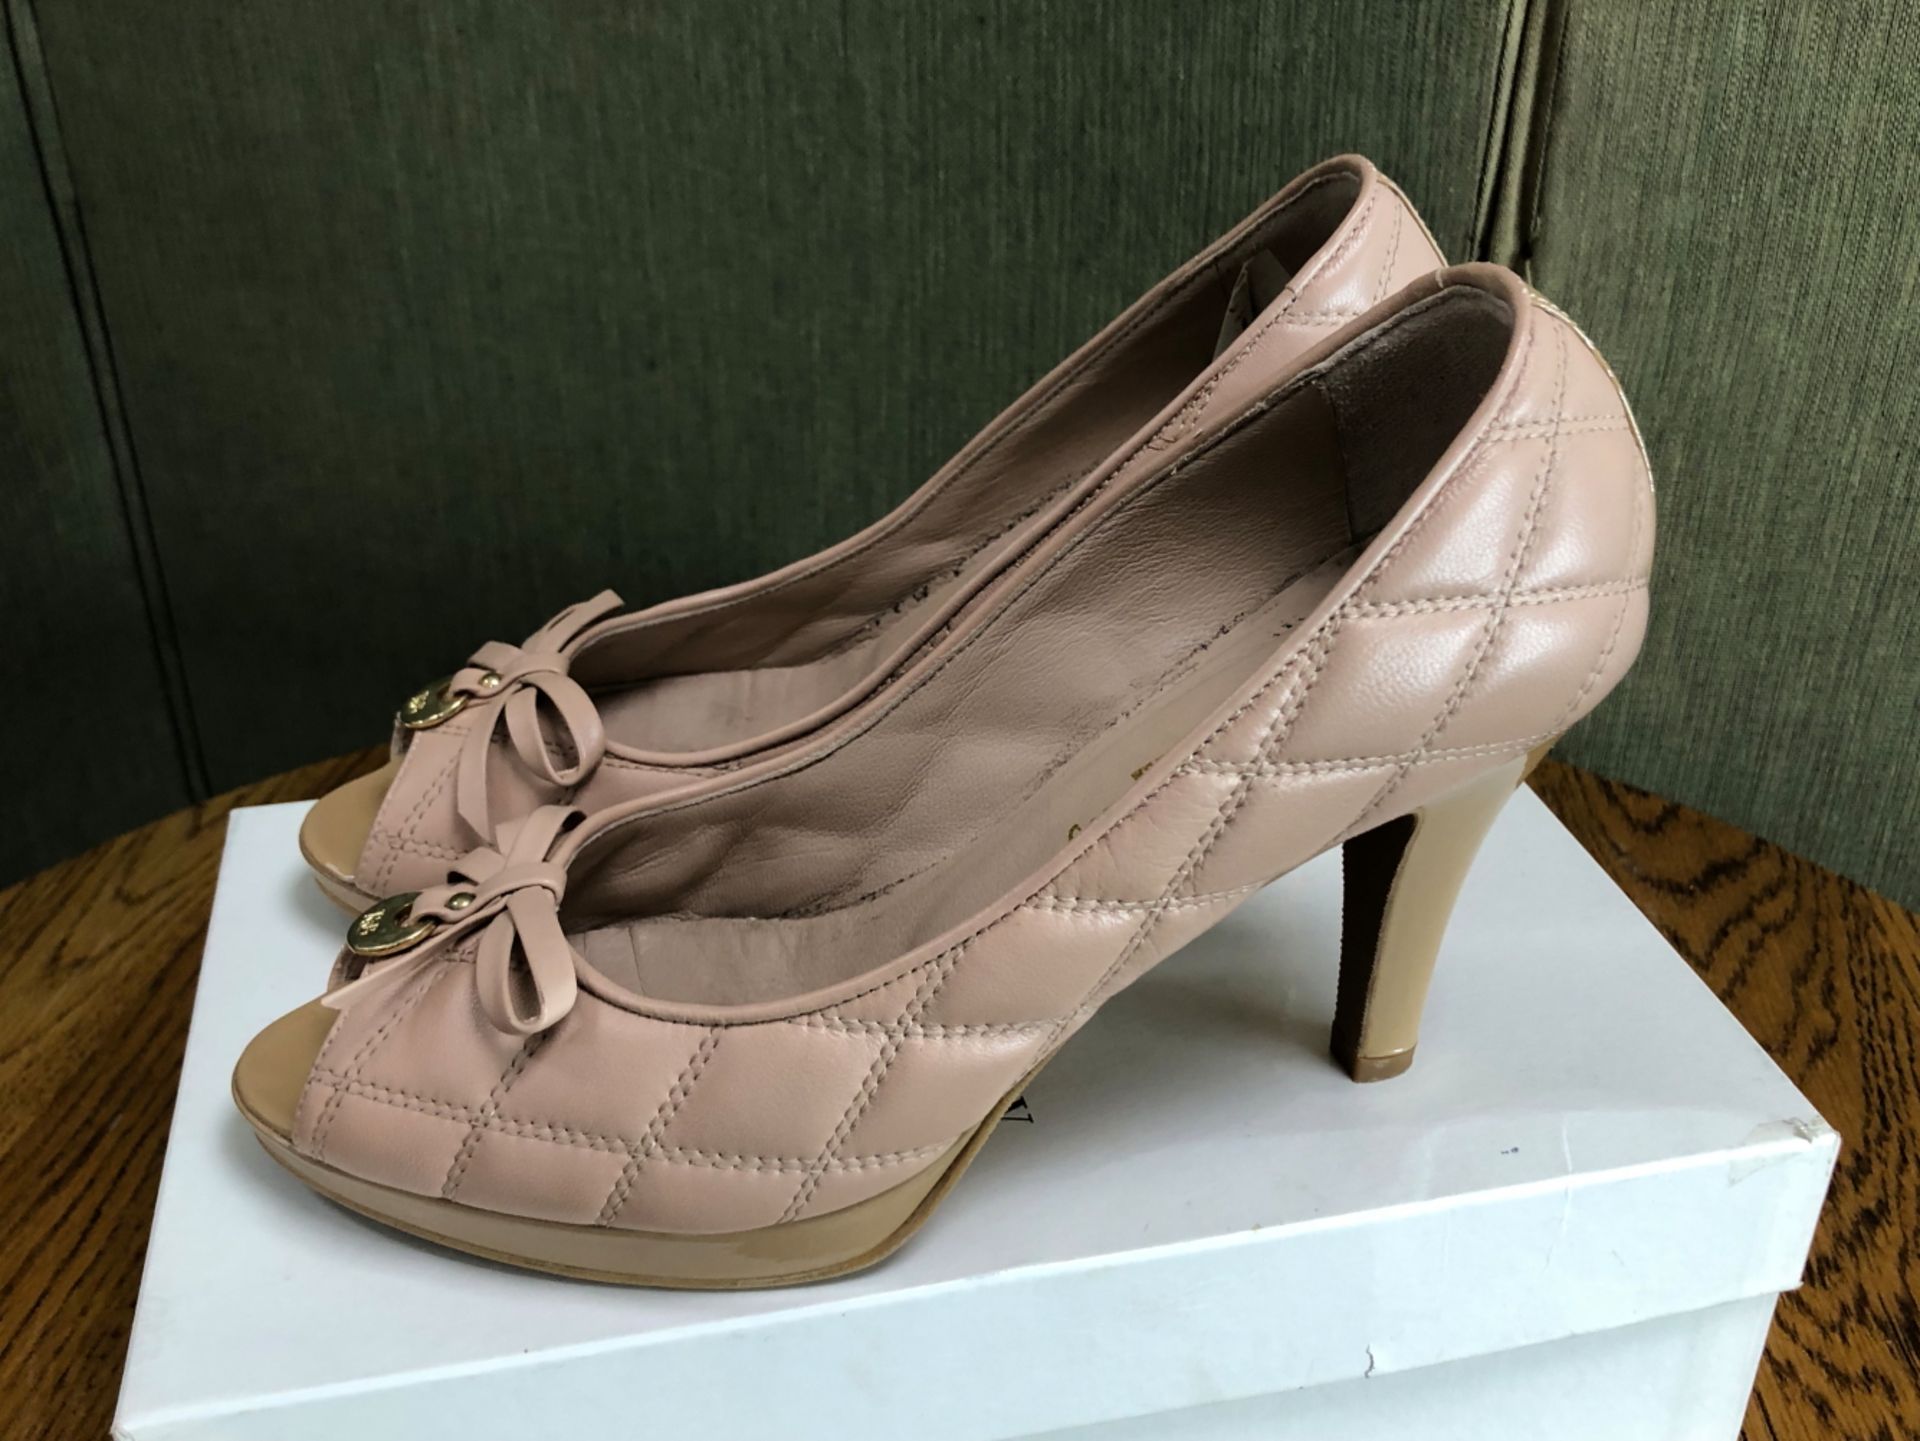 SHOES: A PAIR OF NUDE RUSSELL AND BROMLEY HIGH HEELED QUILTED PLATFORMS, EU SIZE 38.5 - Image 2 of 5